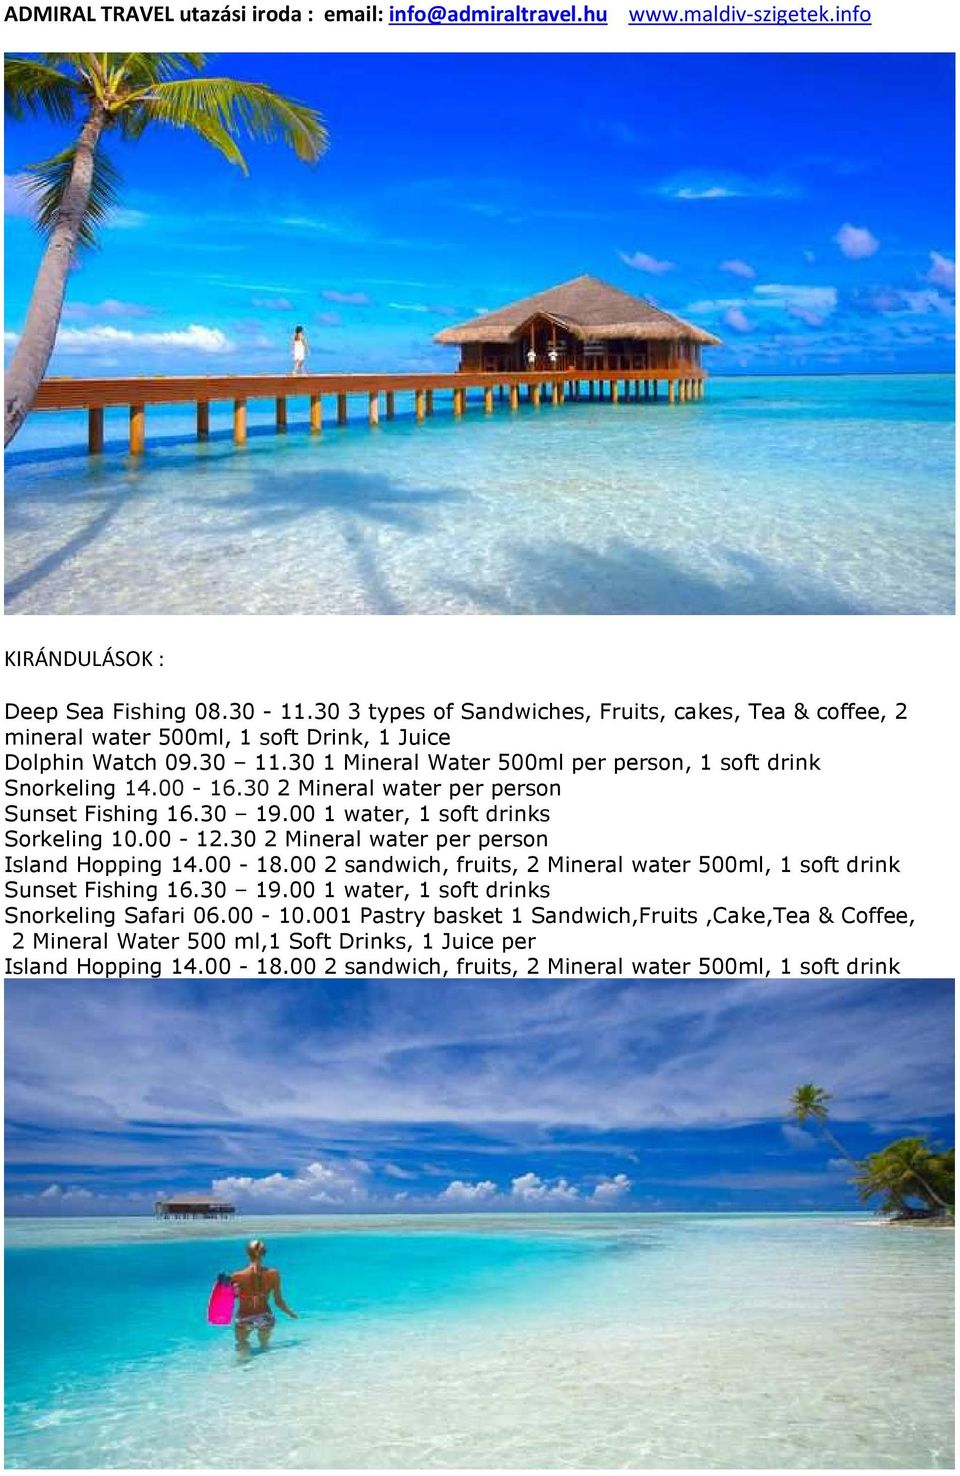 30 2 Mineral water per person Island Hopping 14.00-18.00 2 sandwich, fruits, 2 Mineral water 500ml, 1 soft drink Sunset Fishing 16.30 19.00 1 water, 1 soft drinks Snorkeling Safari 06.